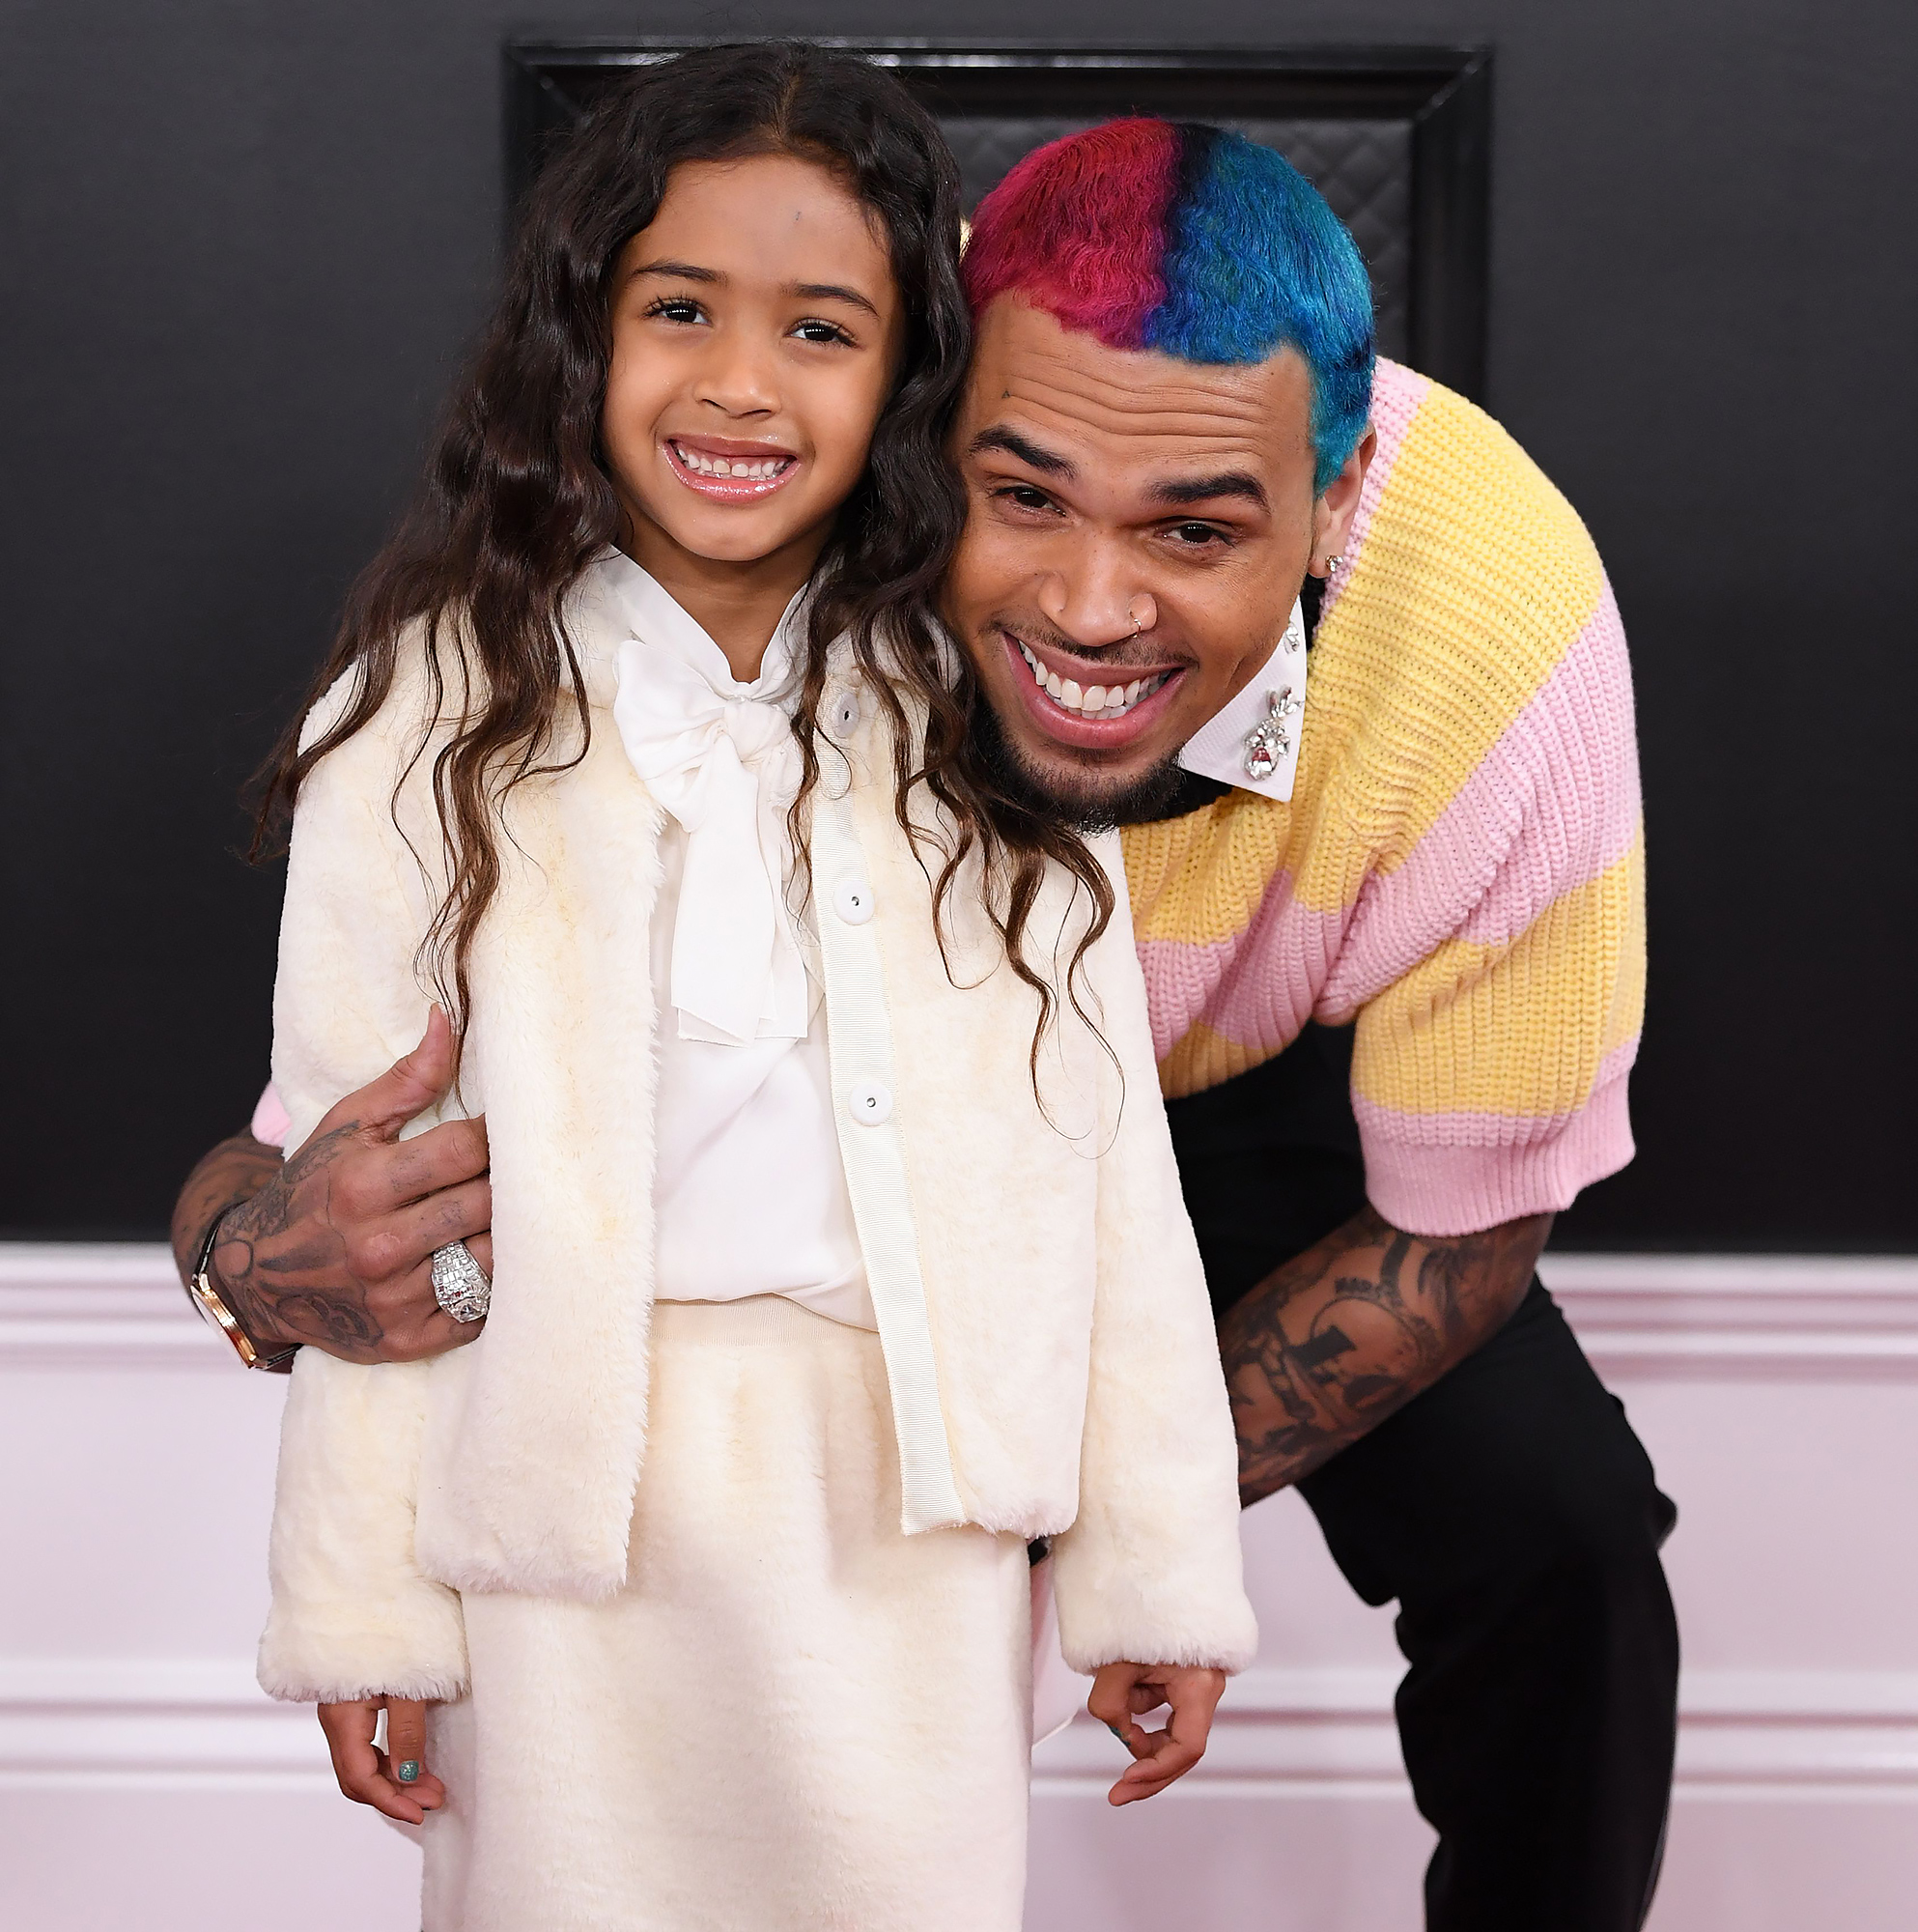 Chris browns daughter royalty is growing up so fast photos